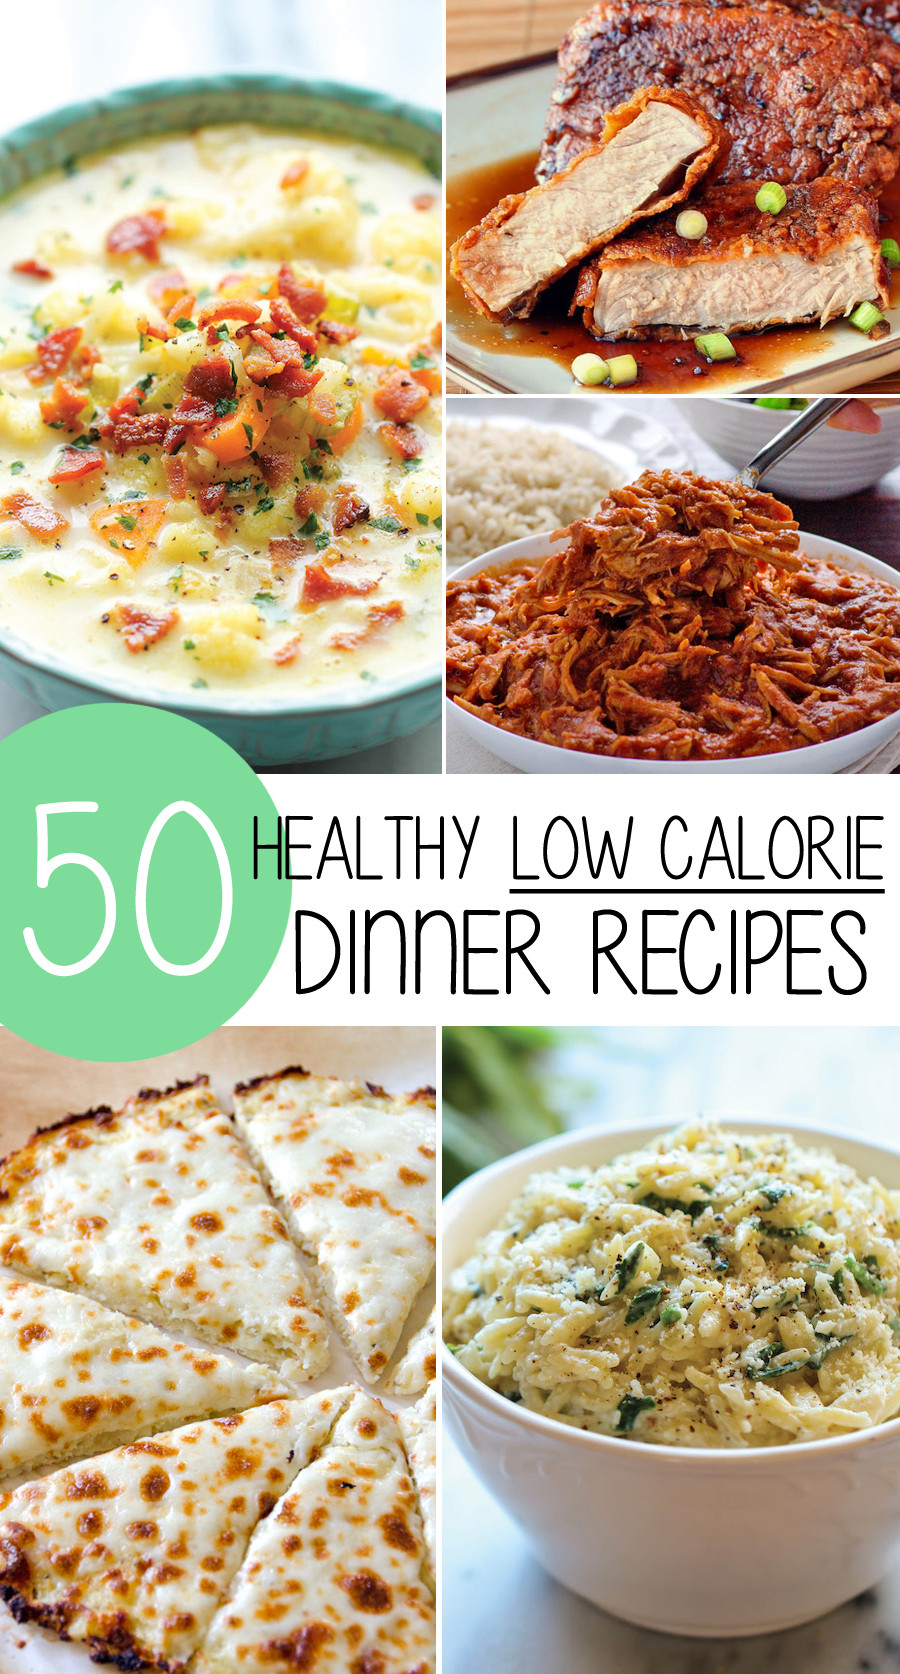 Low Calorie Diet Recipes
 50 Healthy Low Calorie Weight Loss Dinner Recipes